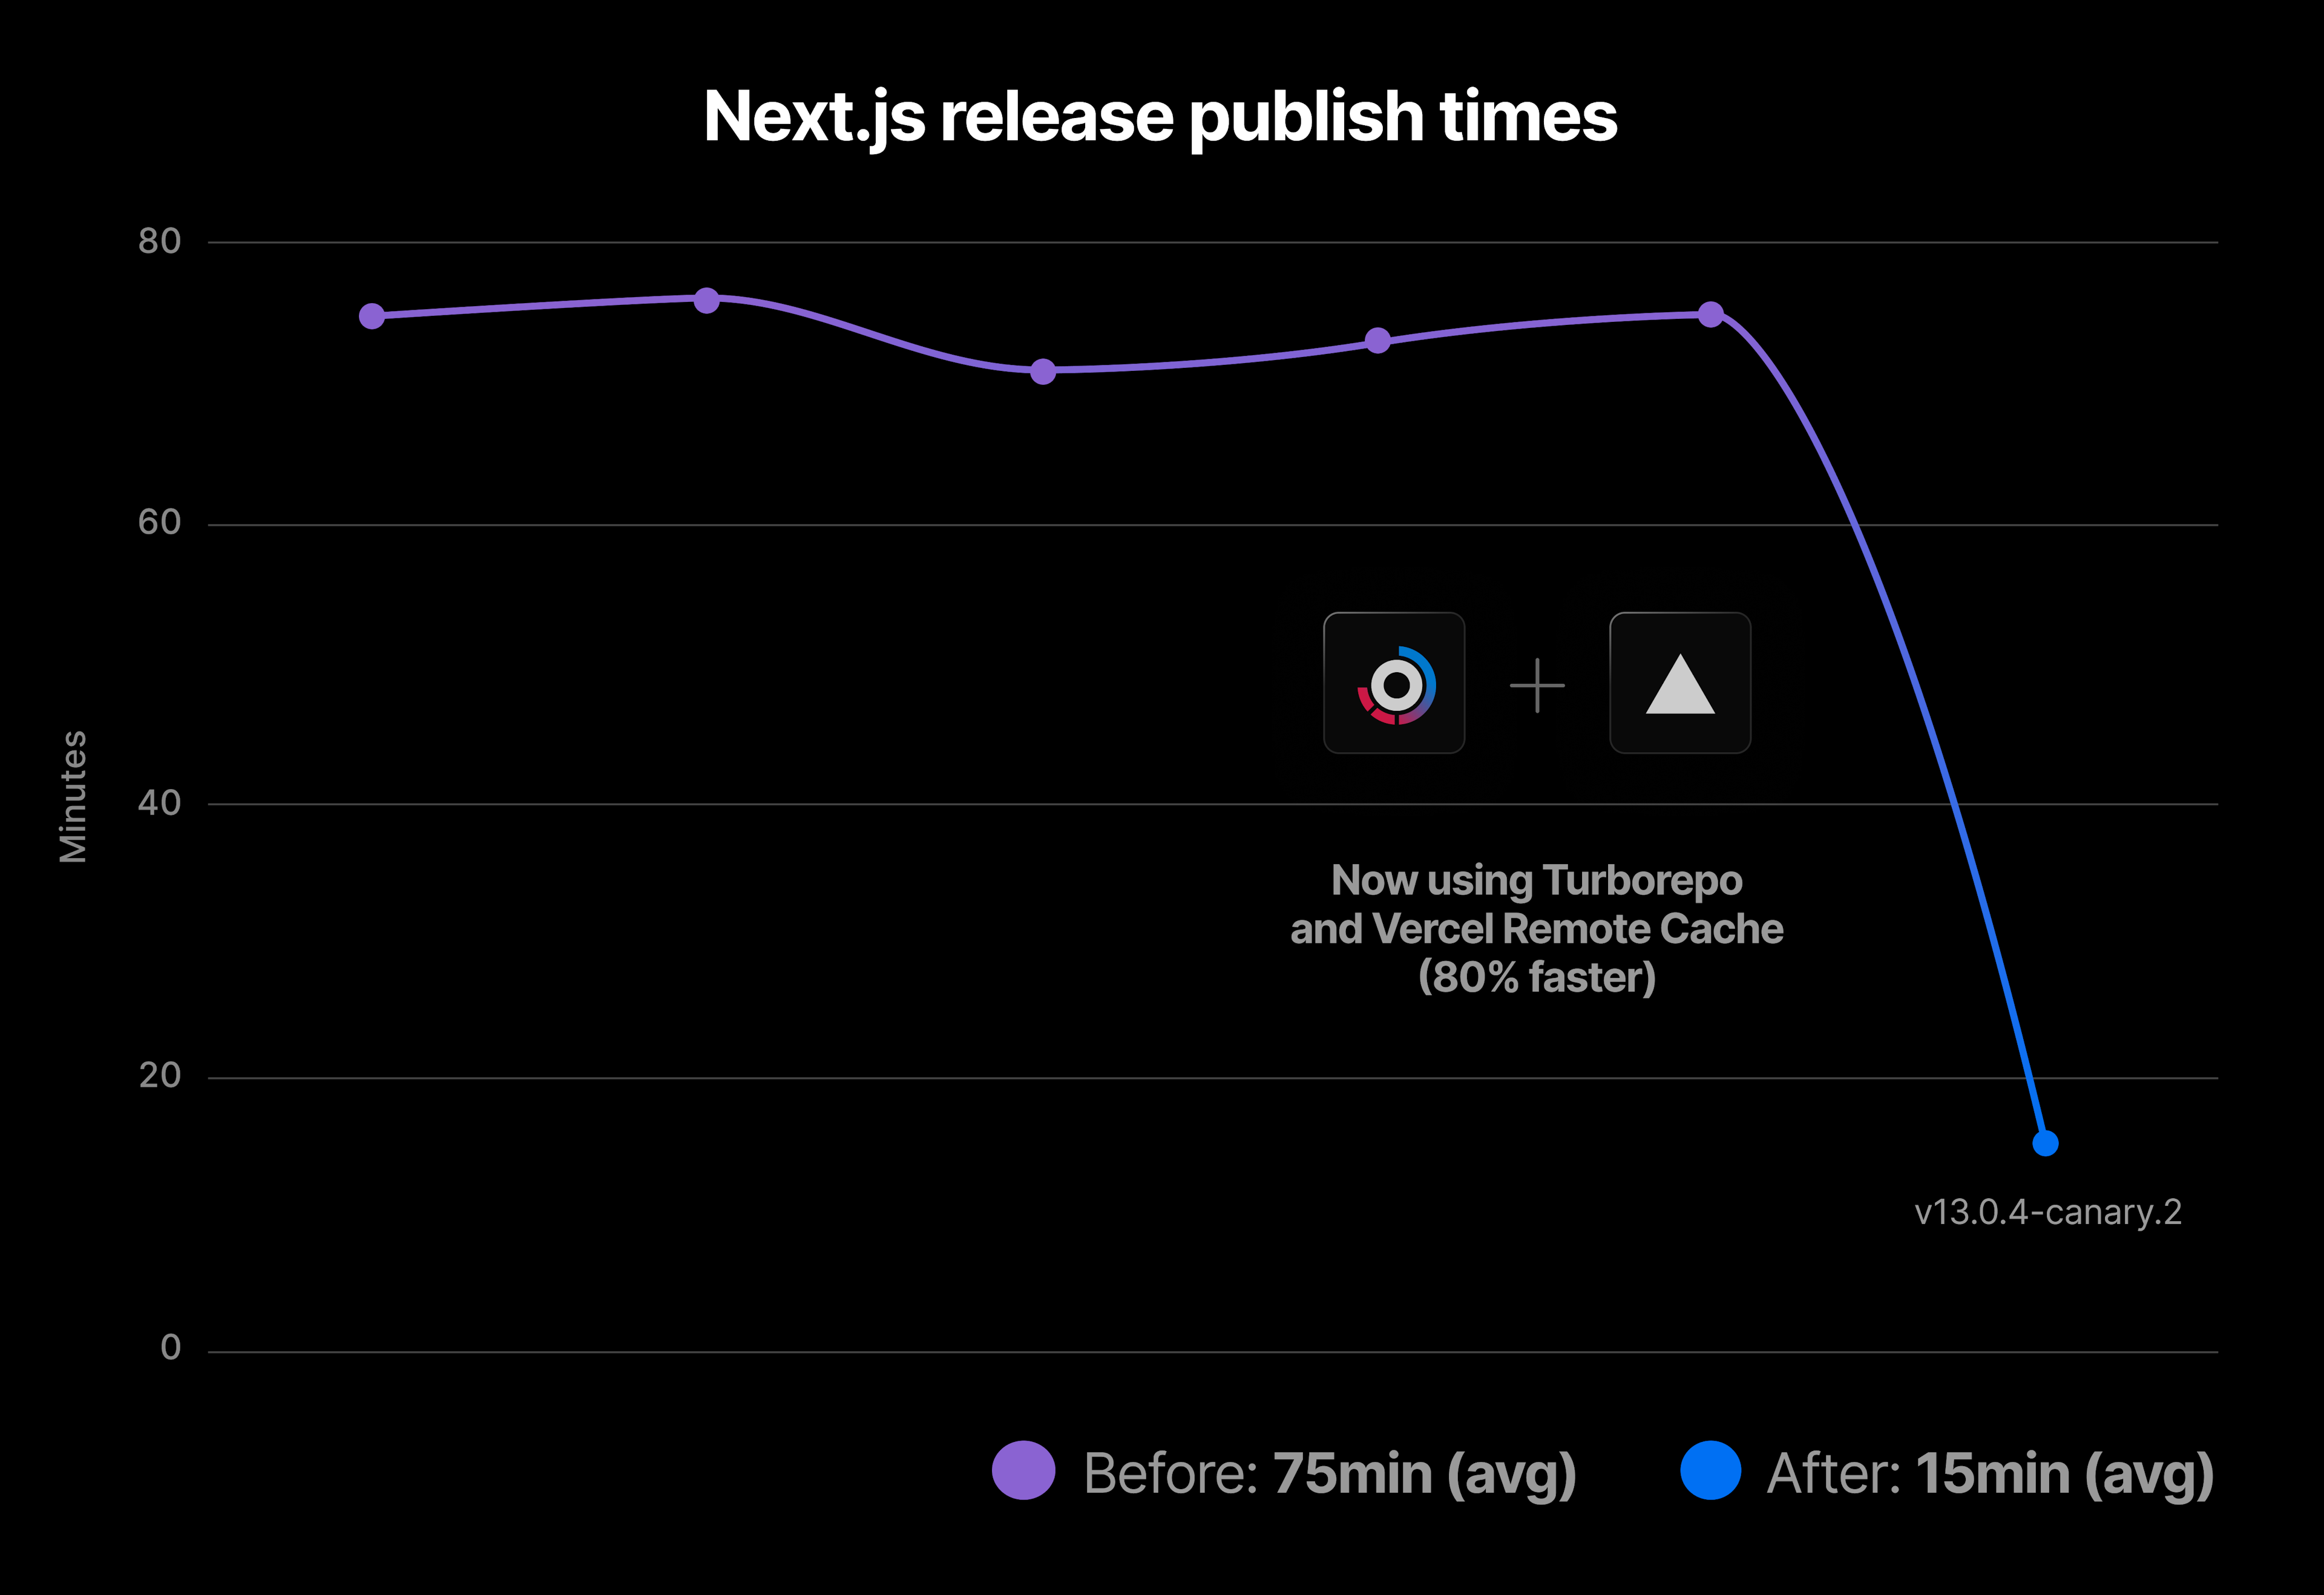 Next.js publishing times falling by 80% using Turborepo Remote Cache on Vercel.